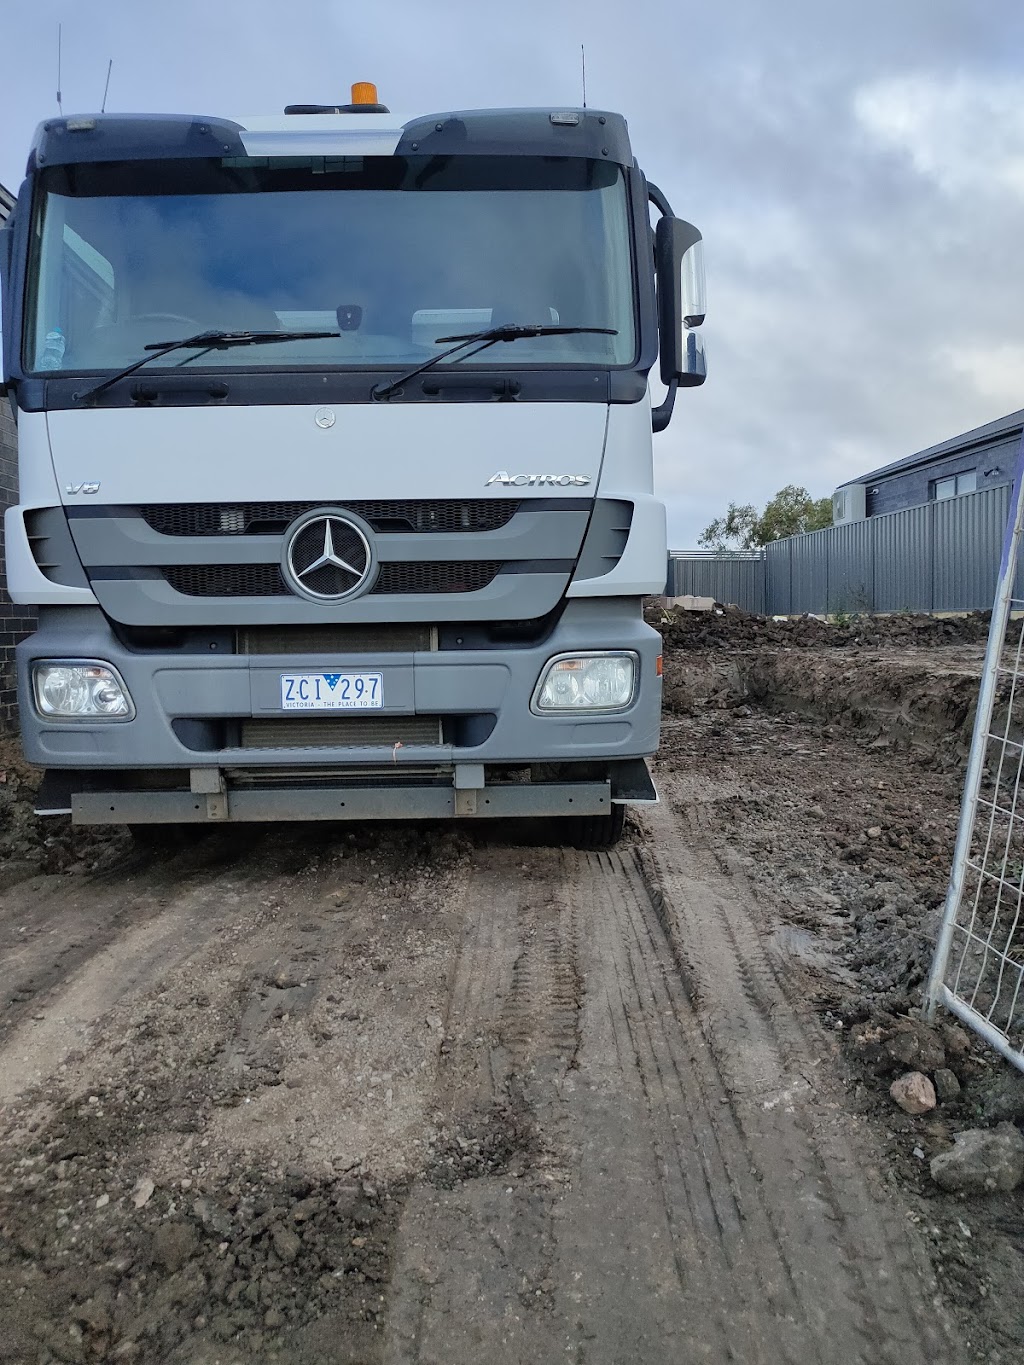 Melbourne Tippers | 16 Glenwood Ave, Wollert VIC 3750, Australia | Phone: 0470 632 722